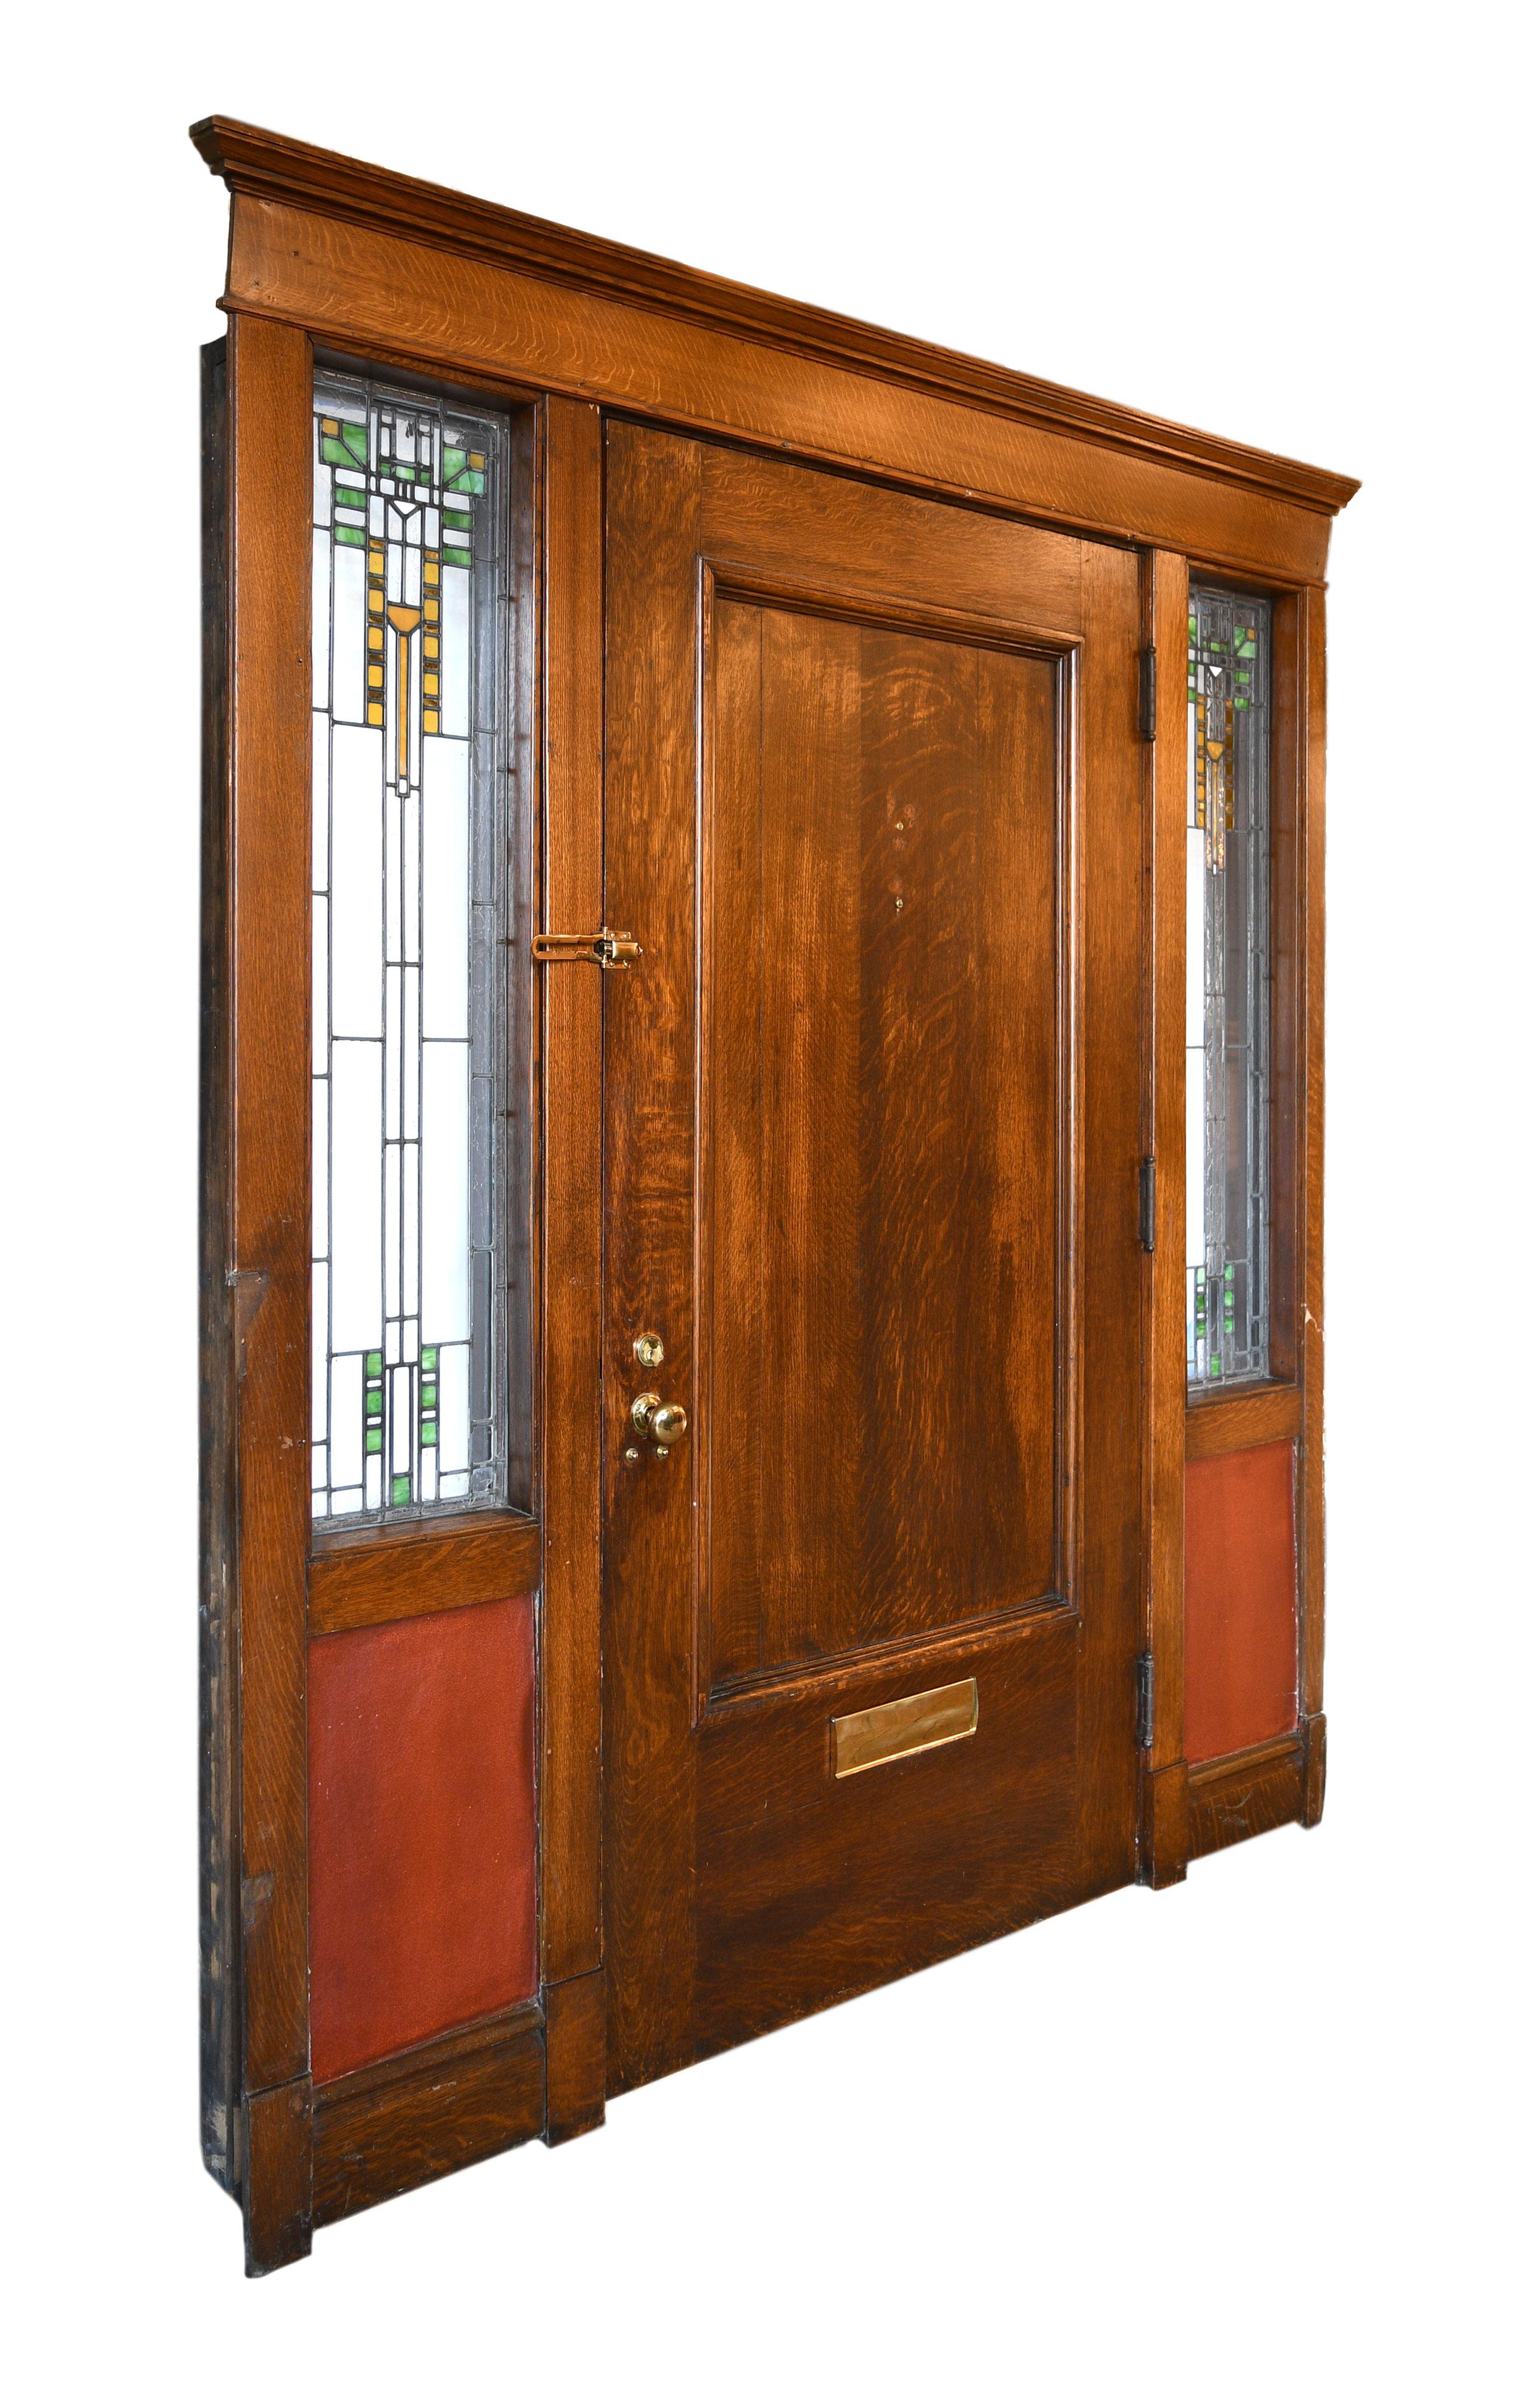 Quartersawn exterior door unit with oversized solid door and Arts & Crafts sidelite windows complete with all original hardware and inside trim. The two stained glass windows on each side of the door give this outstanding piece even more character!